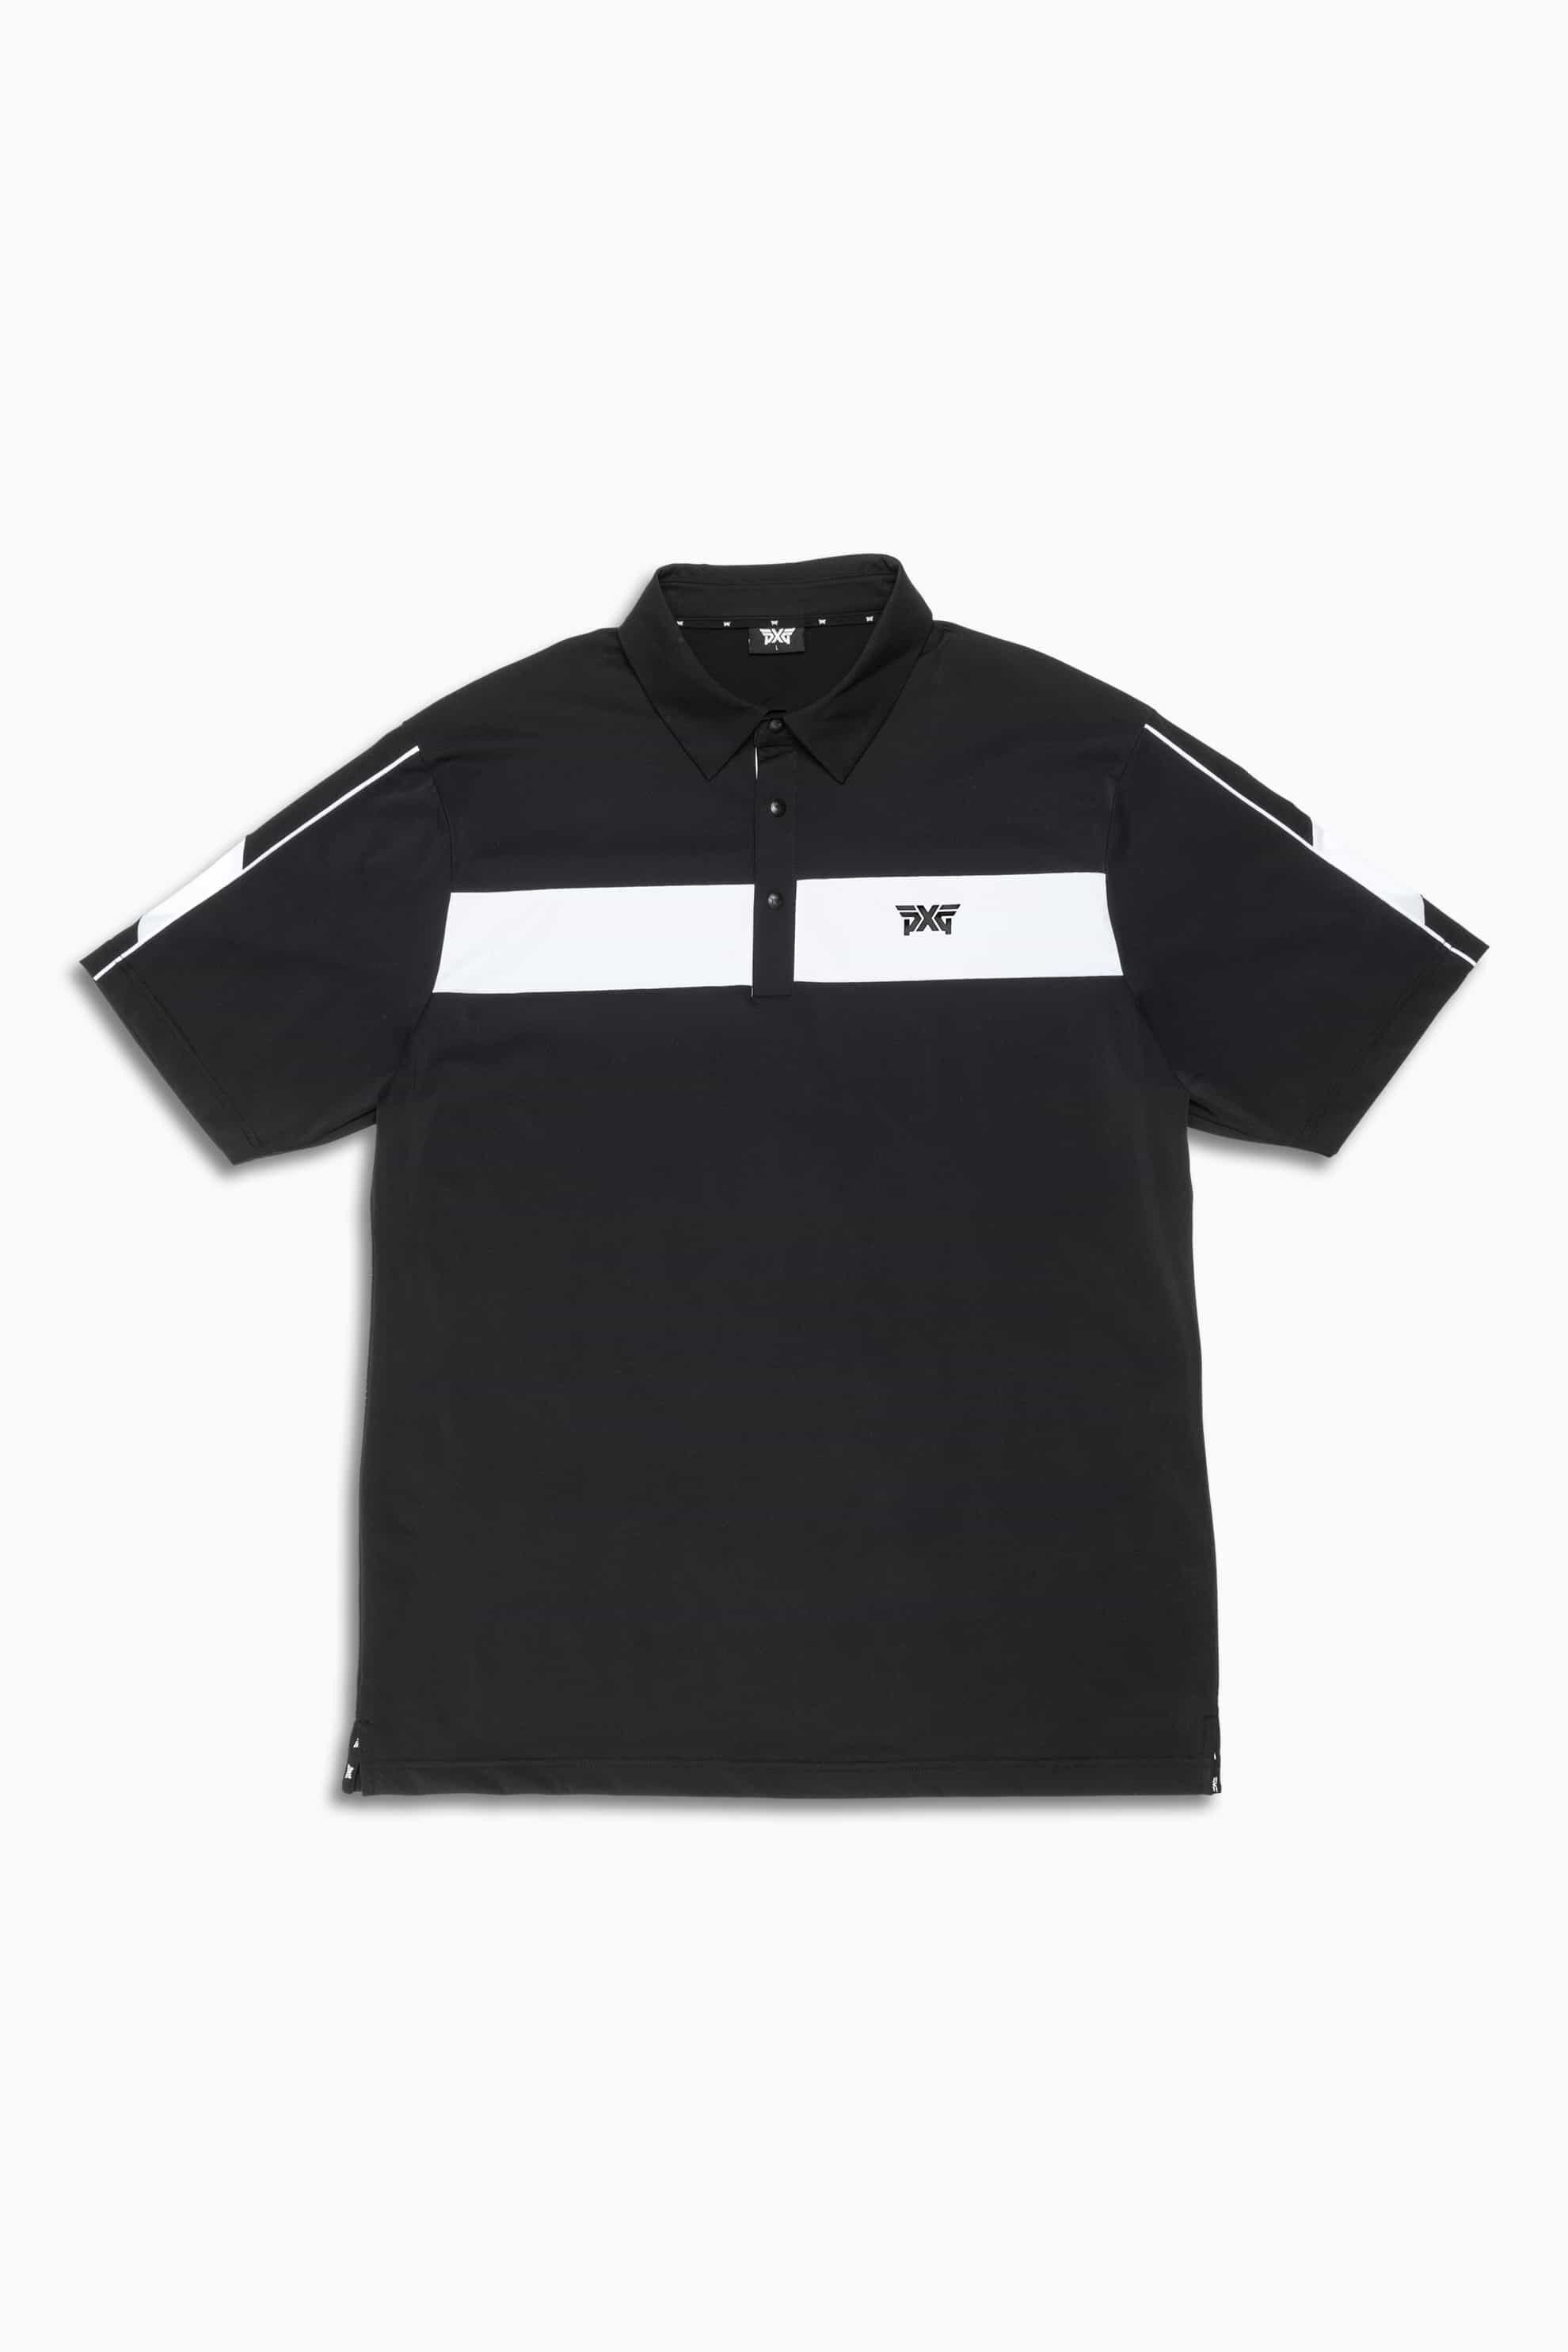 Shop Men's Golf Tops - Shirts, Pullovers and More | PXG